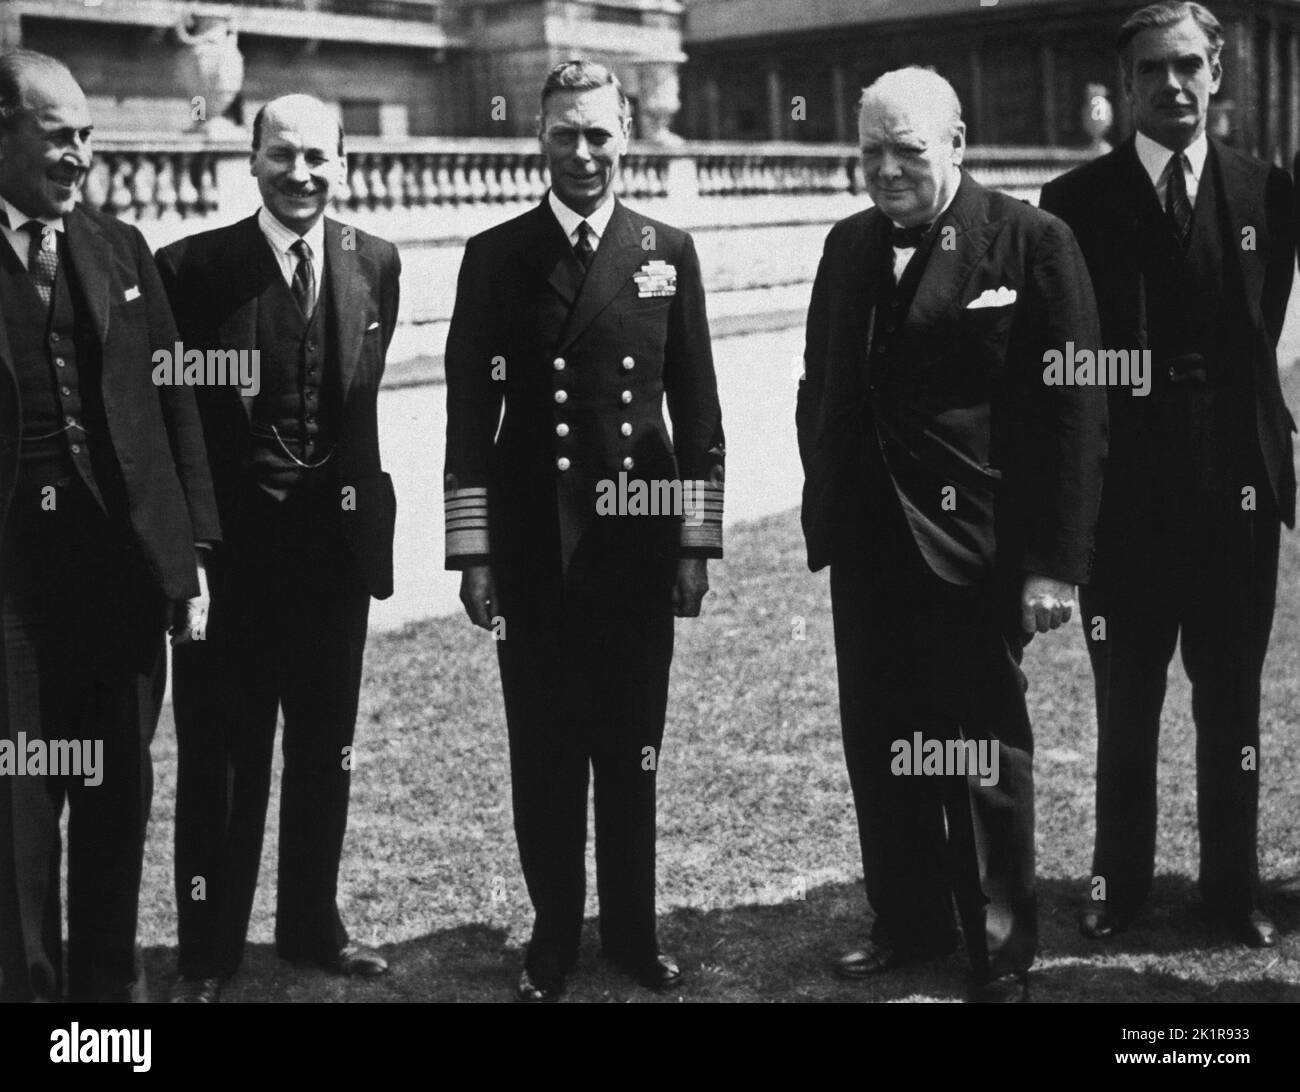 Churchill at Buckingham Palace with fellow war leaders.         L-R: Sir John Anderson, Clement Attlee, H.M. The King, WSC, Anthony Eden. Aug 1944. Stock Photo